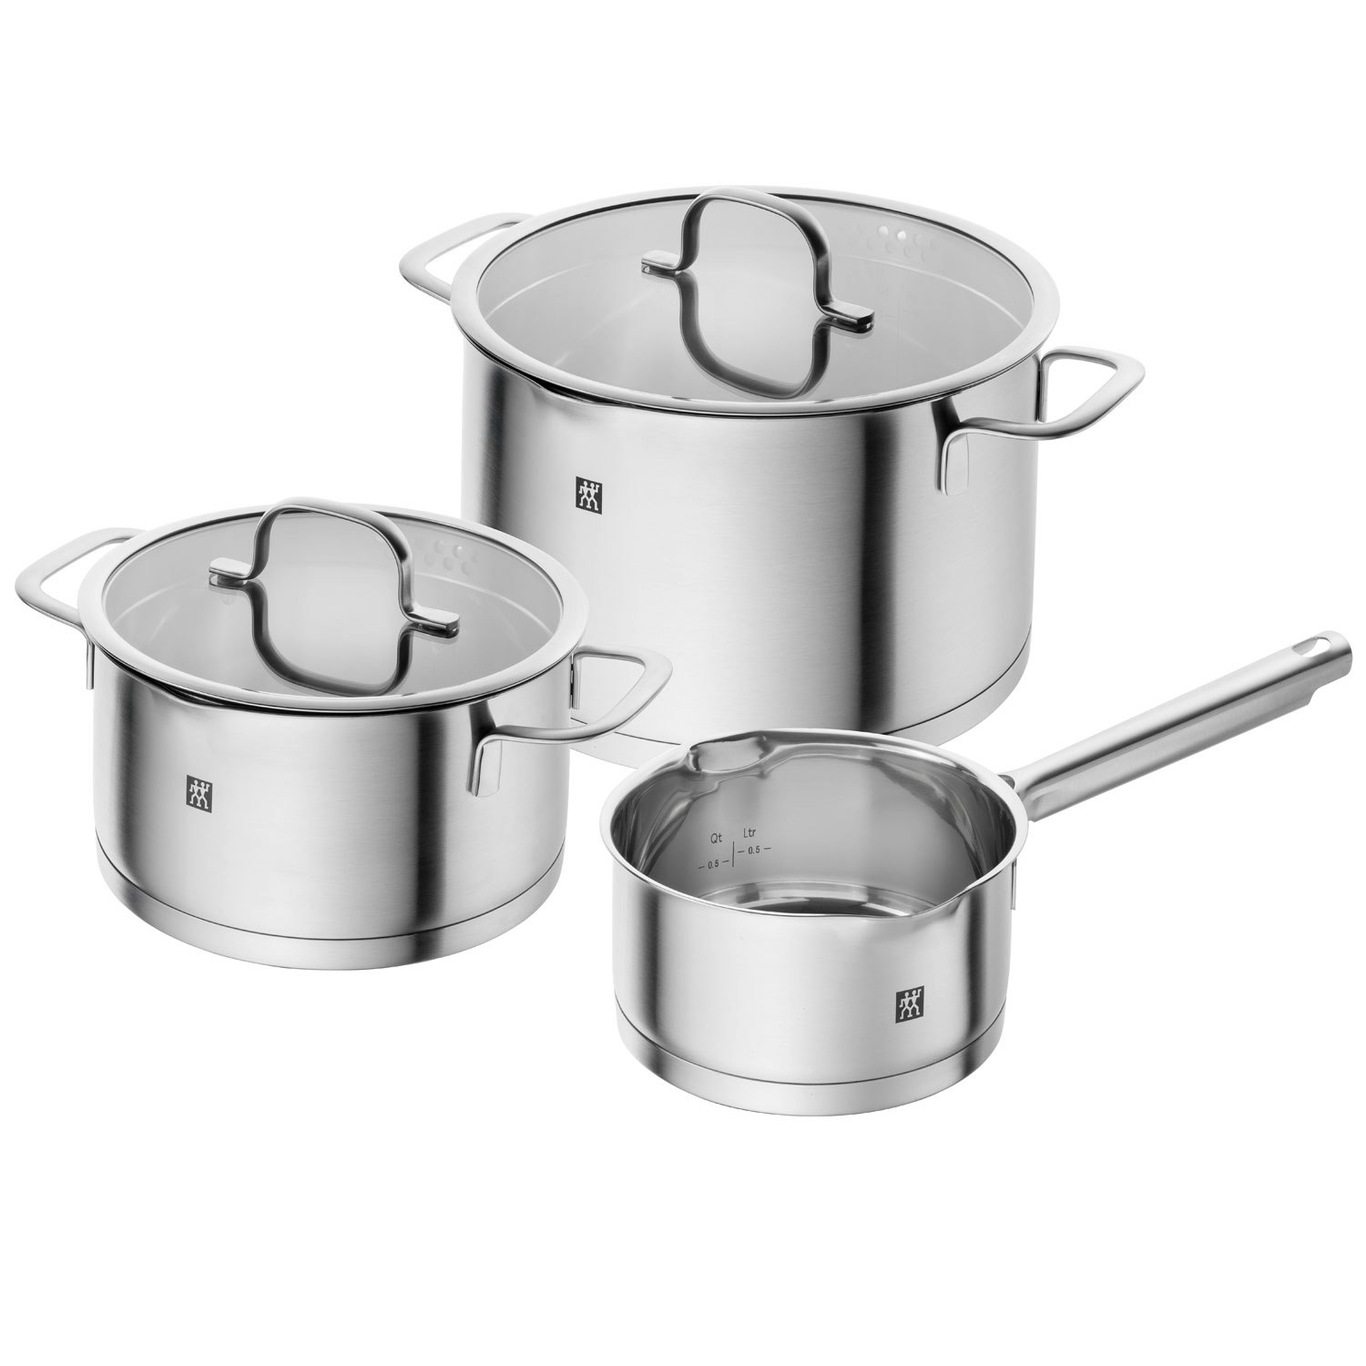 https://royaldesign.com/image/10/zwilling-true-flow-pot-set-stainless-steel-3-pieces-0?w=800&quality=80